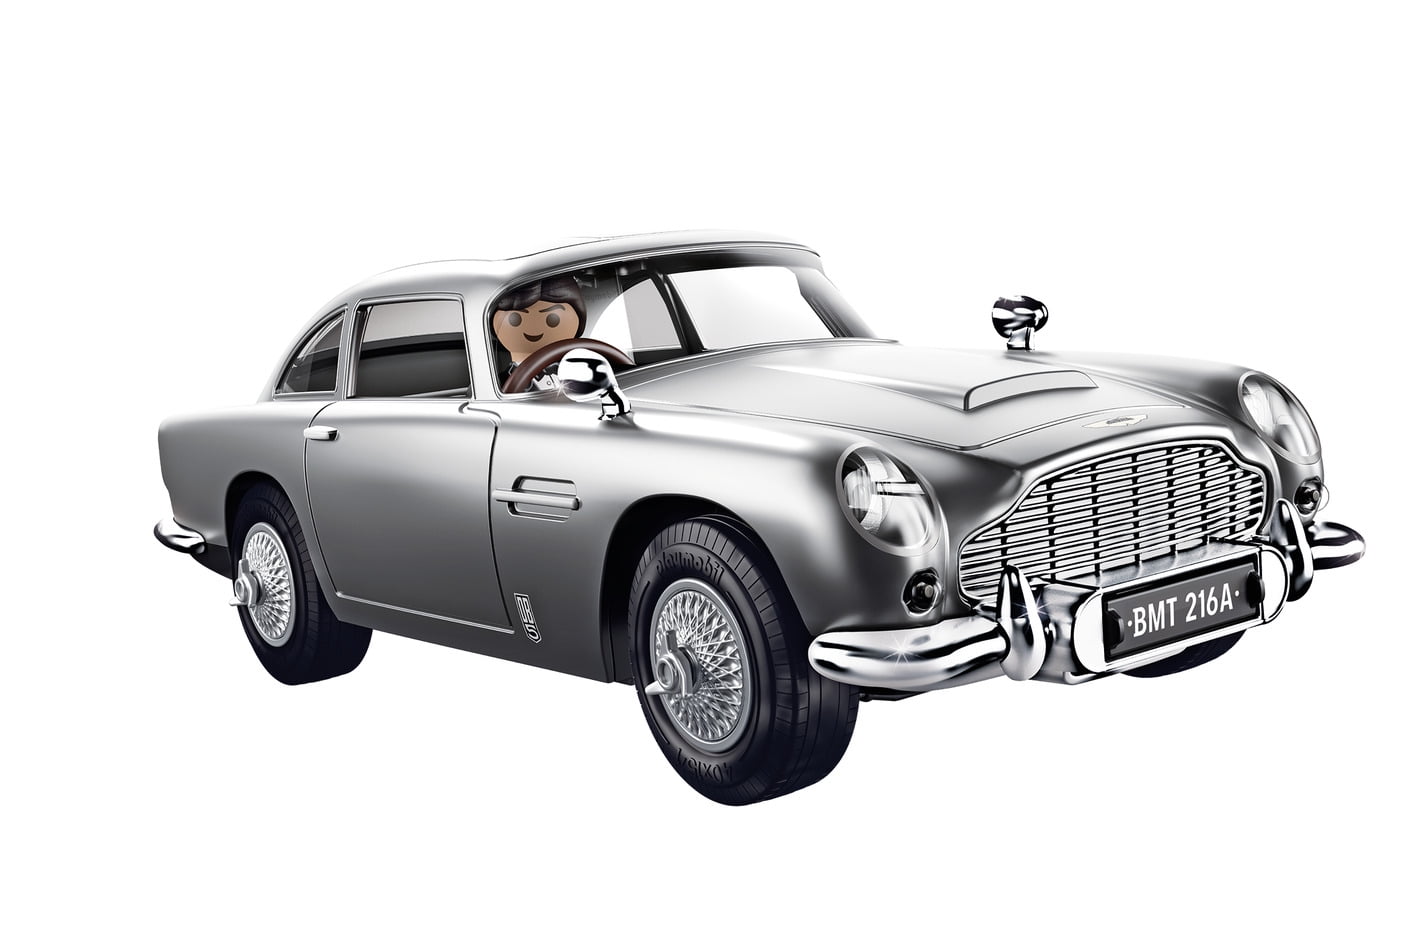 Aston Martin Bond Car Childrens Wall Stickers Bedroom Decal Wall Art 4 Sizes 